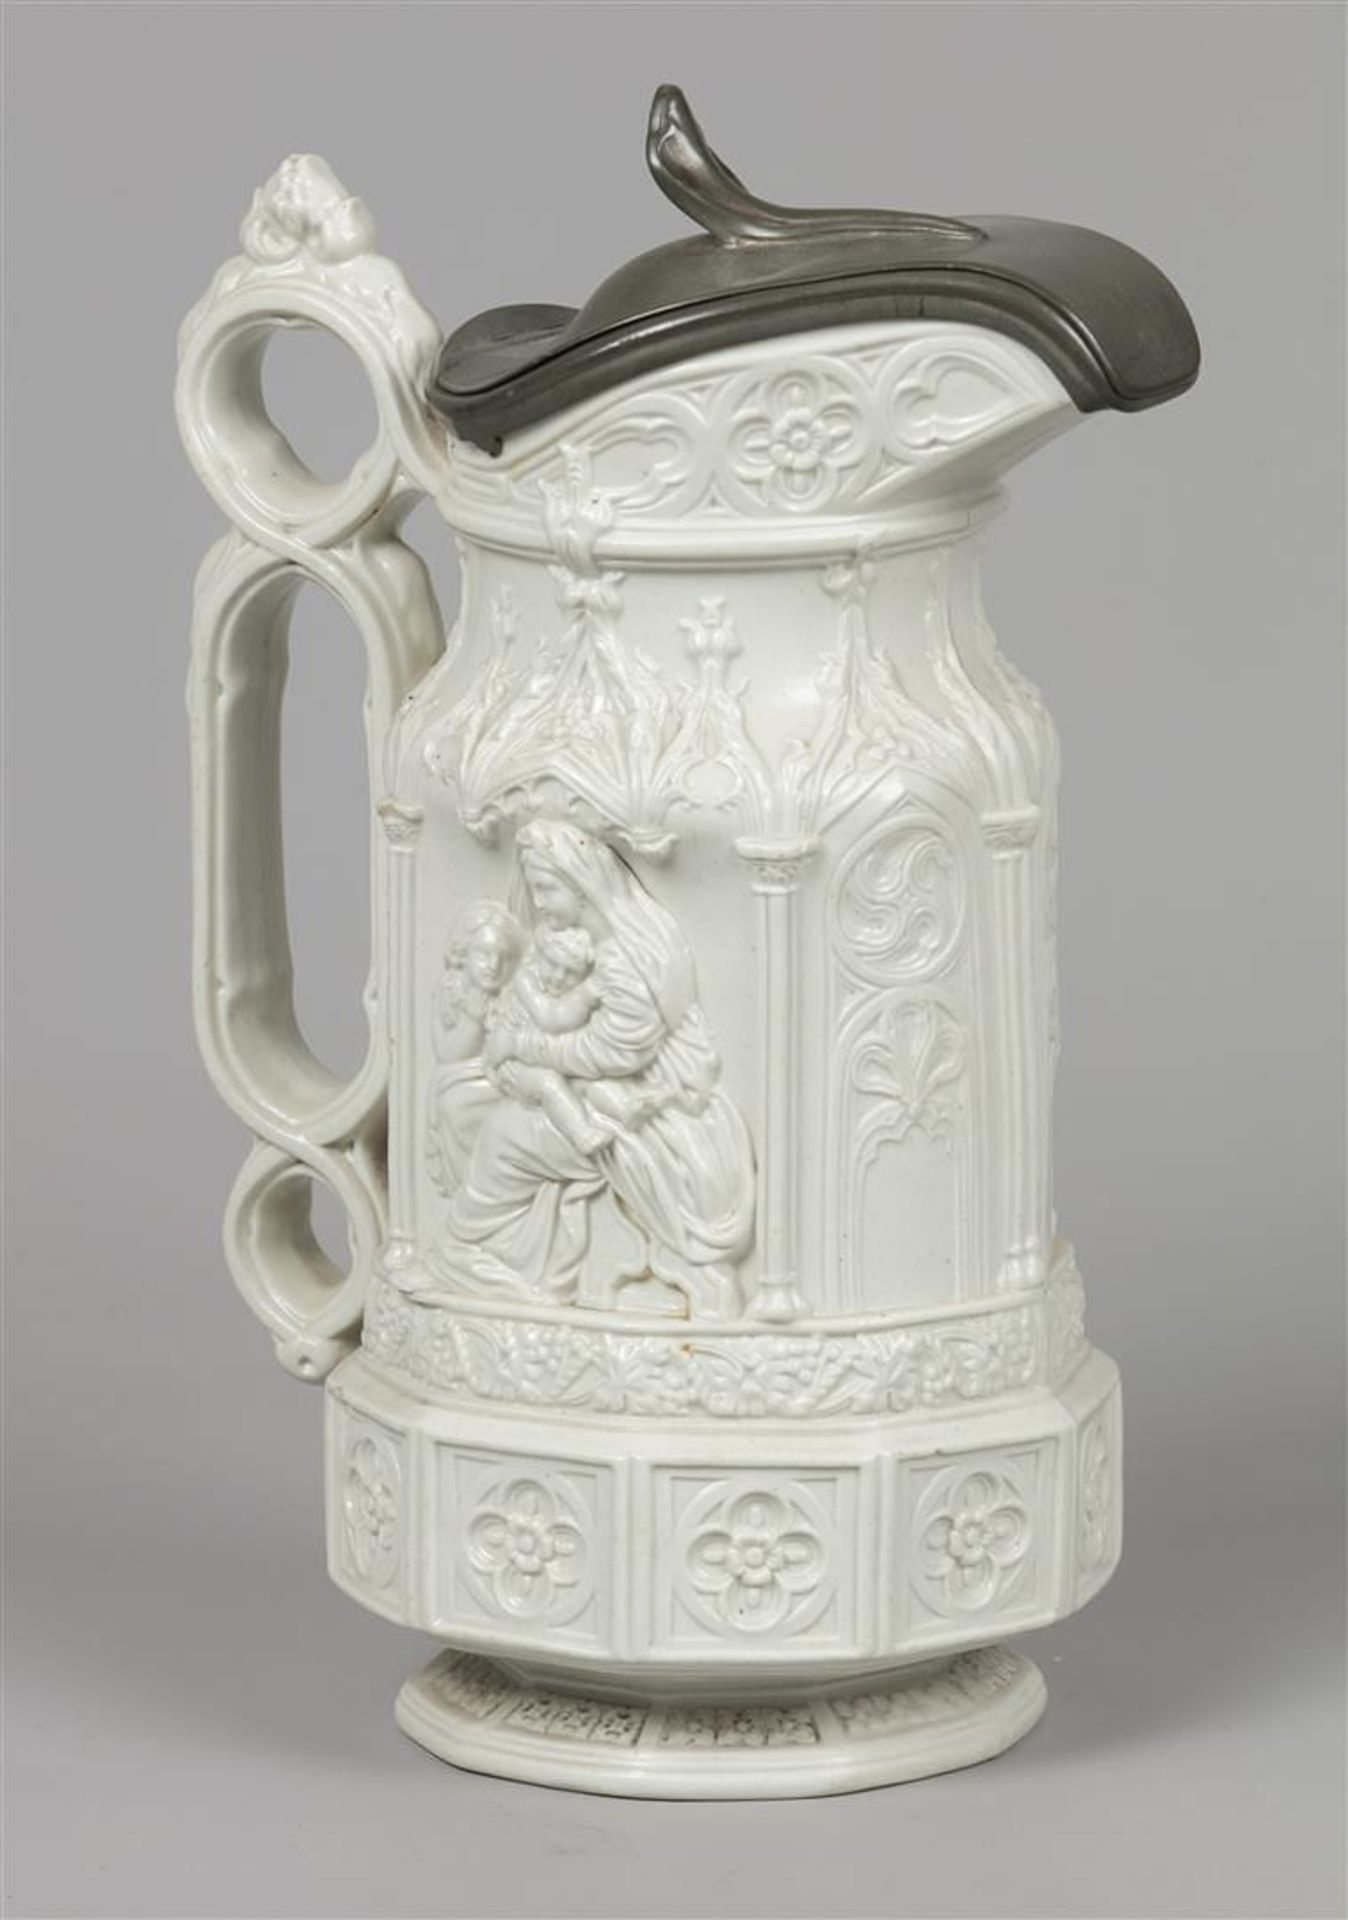 A Charles Meigh York Minster Jug with pewter valve. - Image 3 of 6